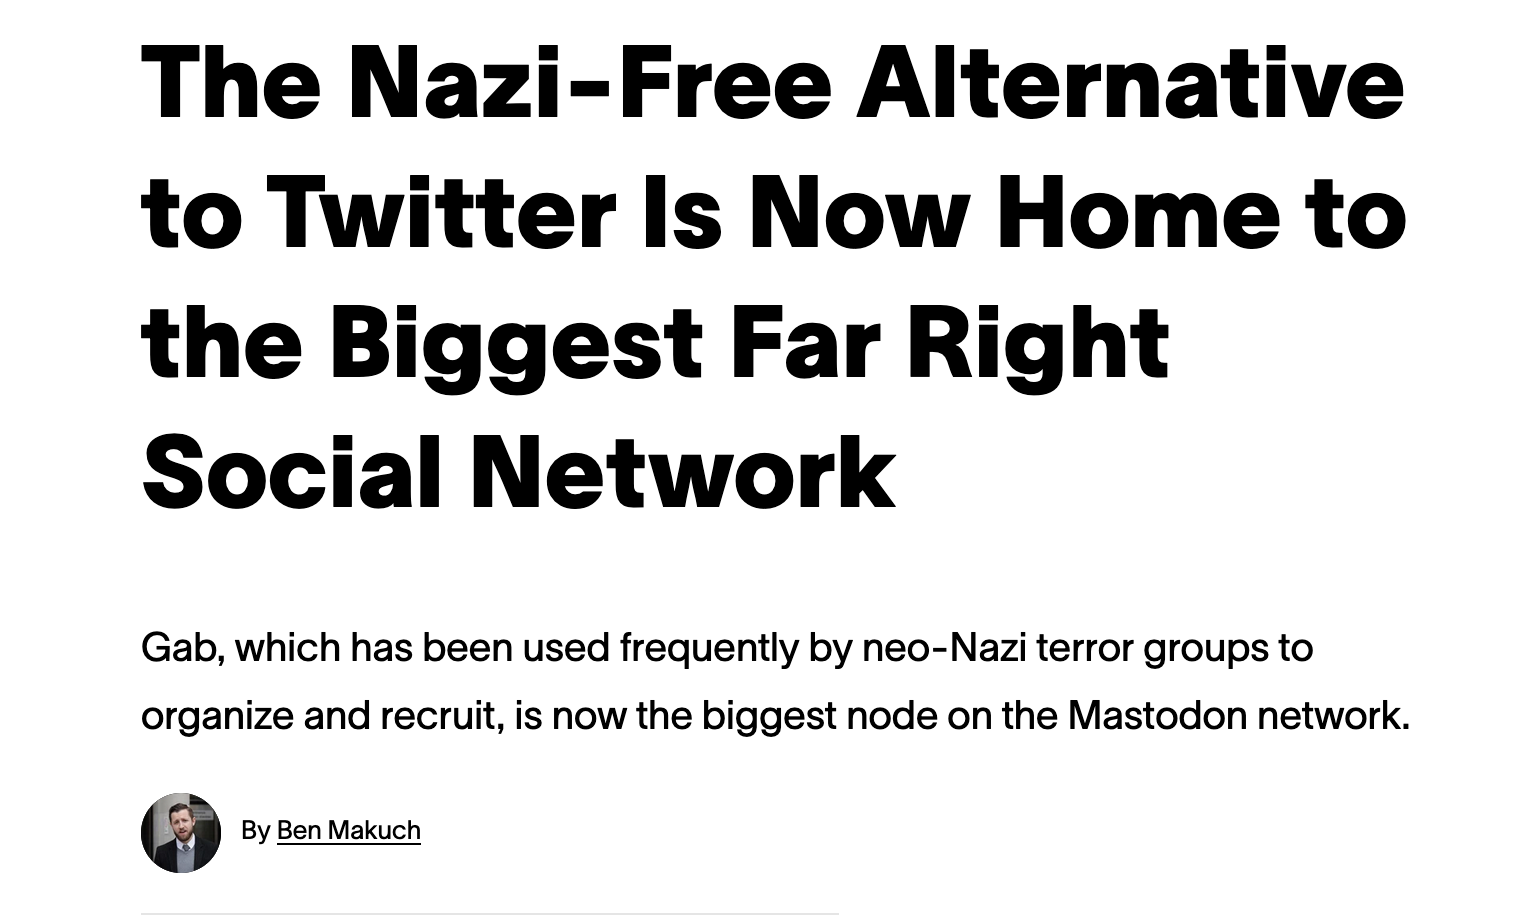 The Nazi-Free Alternative to Twitter Is Now Home to the Biggest Far Right Social Network Gab, which has been used frequently by neo-Nazi terror groups to organize and recruit, is now the biggest node on the Mastodon network. Ben Makuch